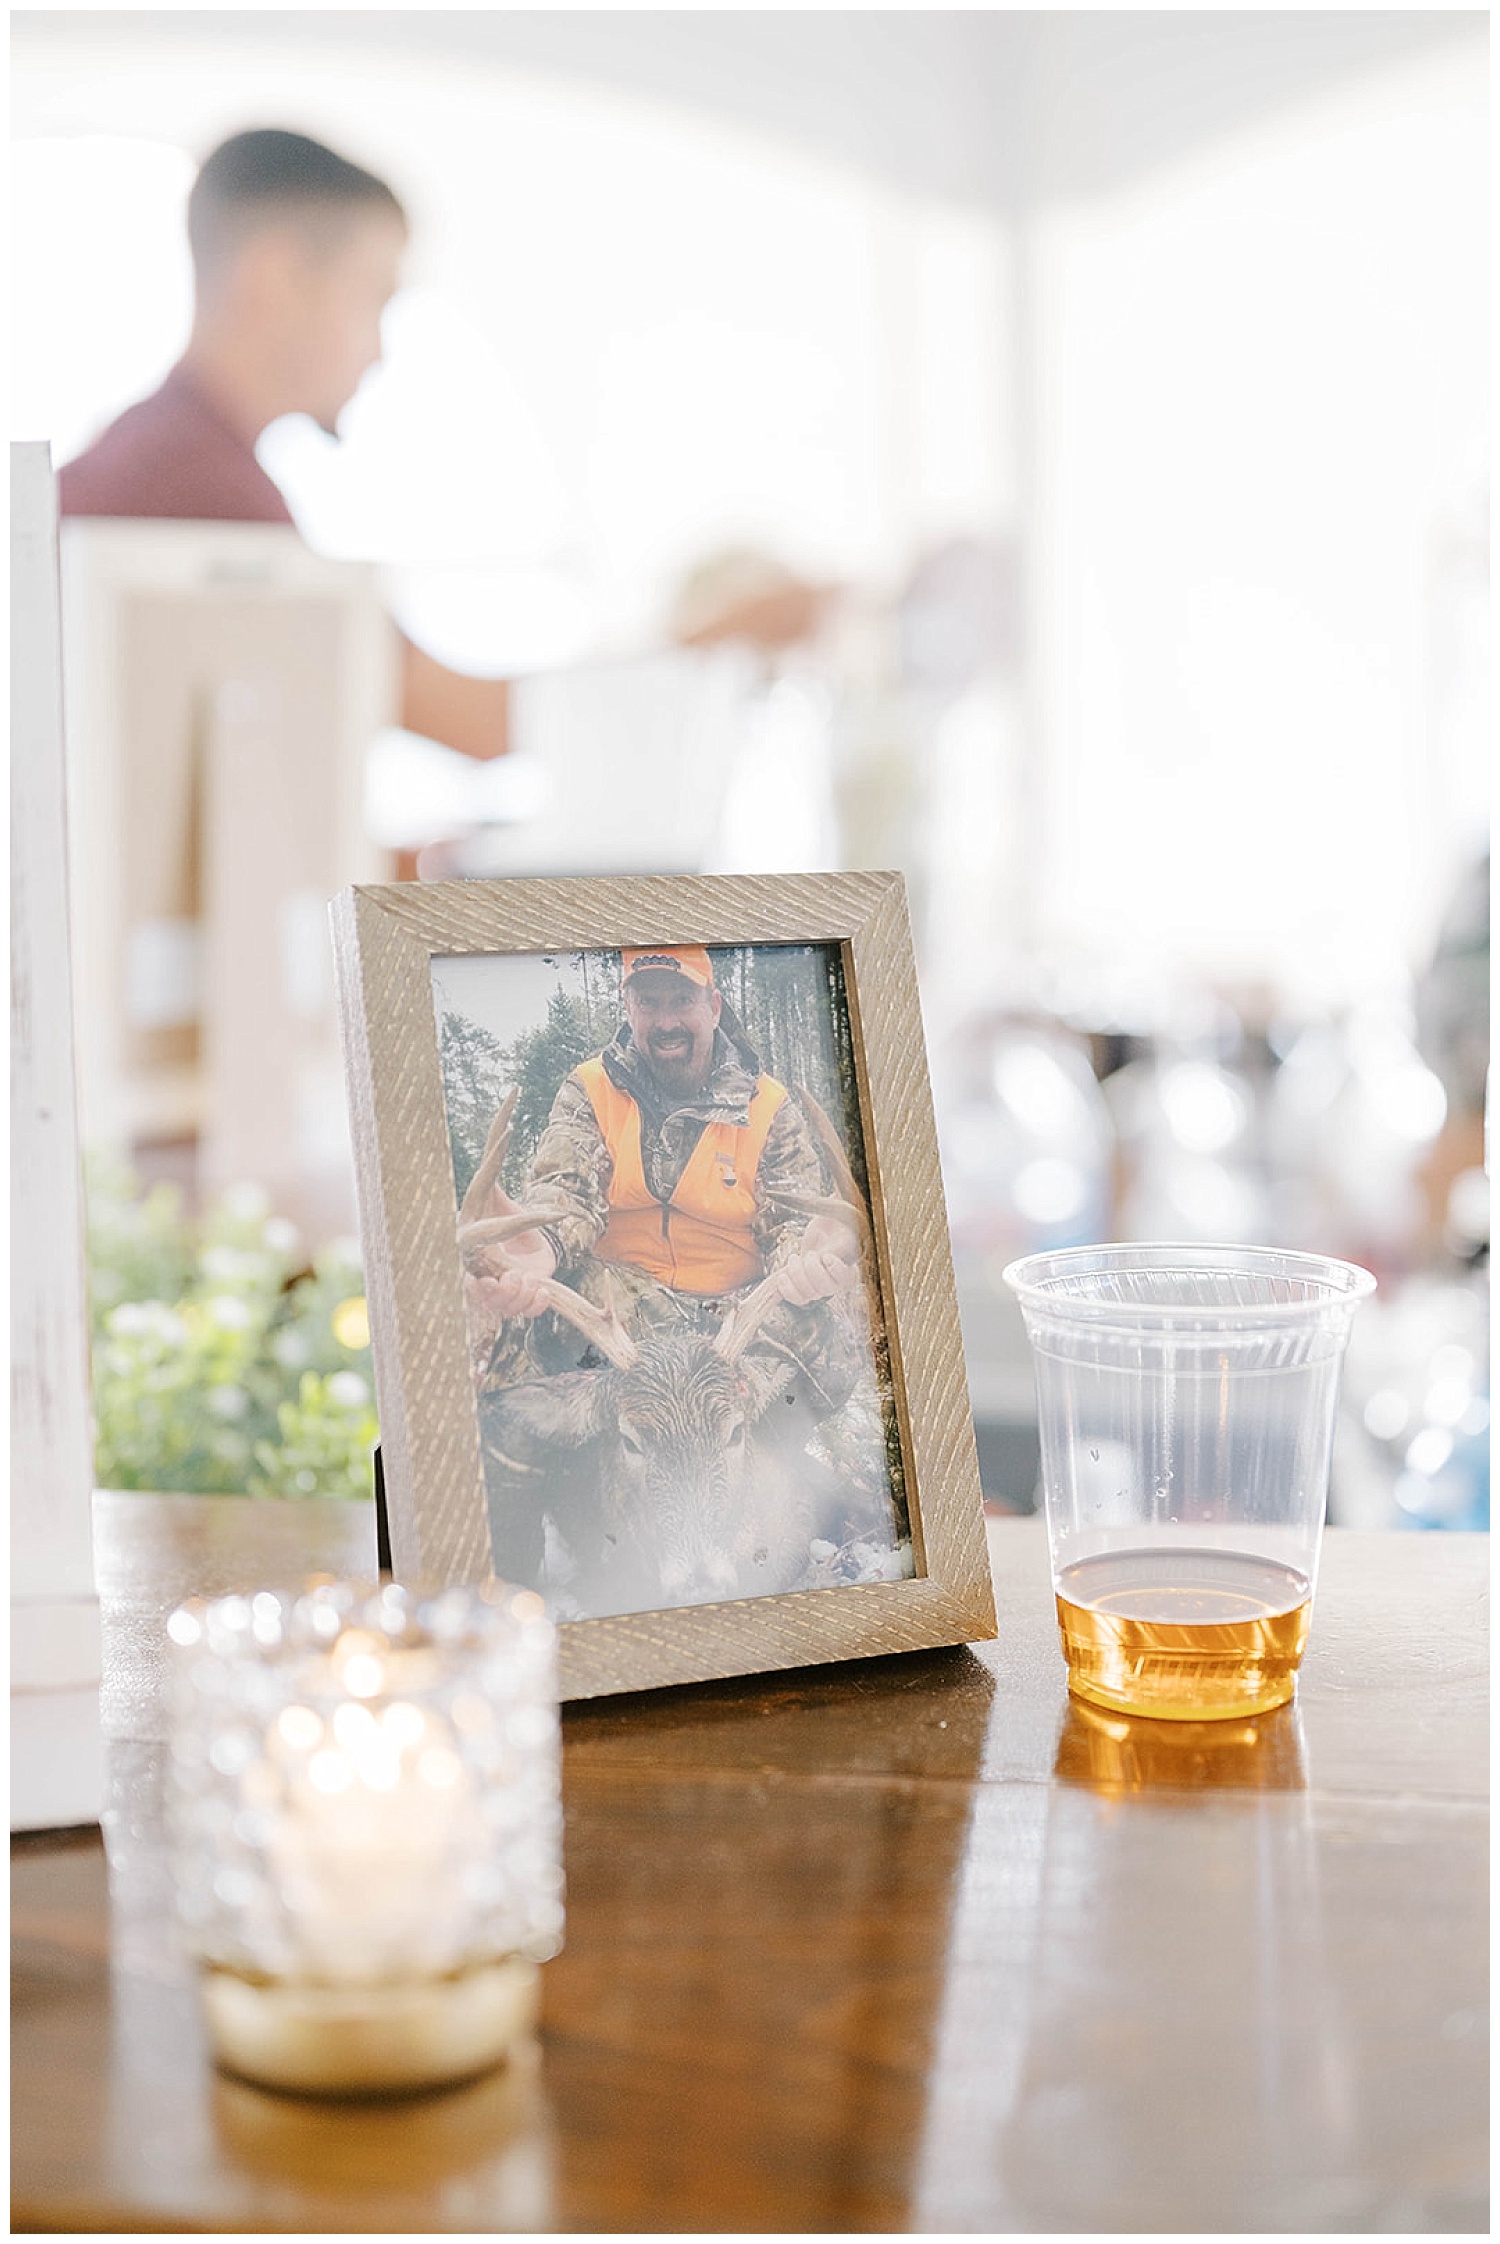 a shot of whiskey next to the framed photo of the bride's late dad